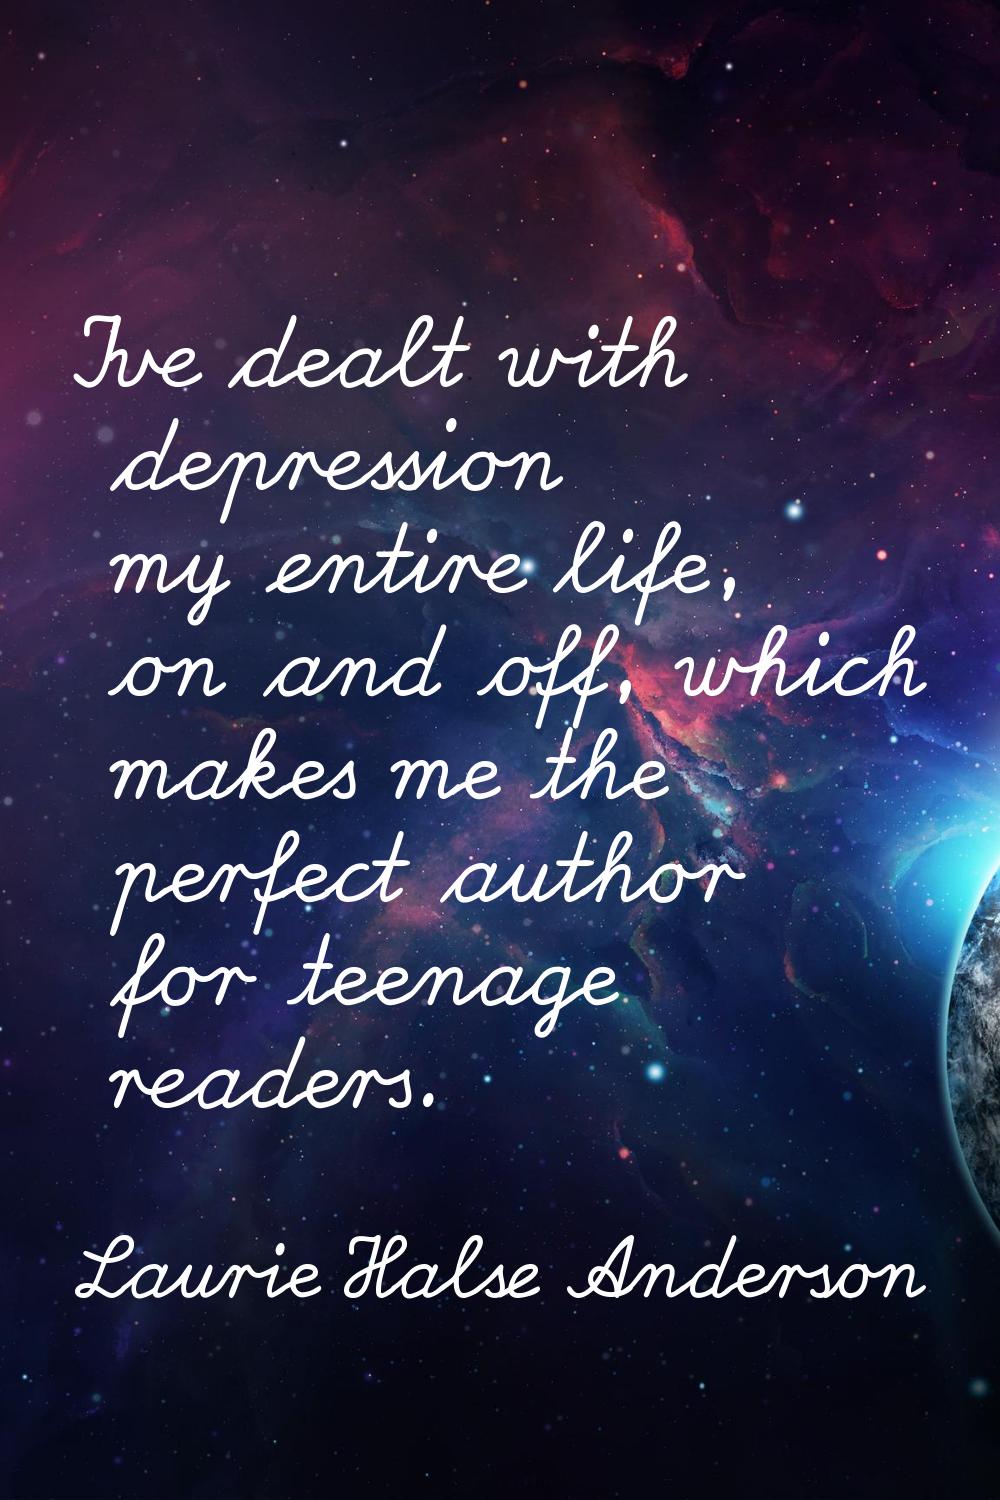 I've dealt with depression my entire life, on and off, which makes me the perfect author for teenag